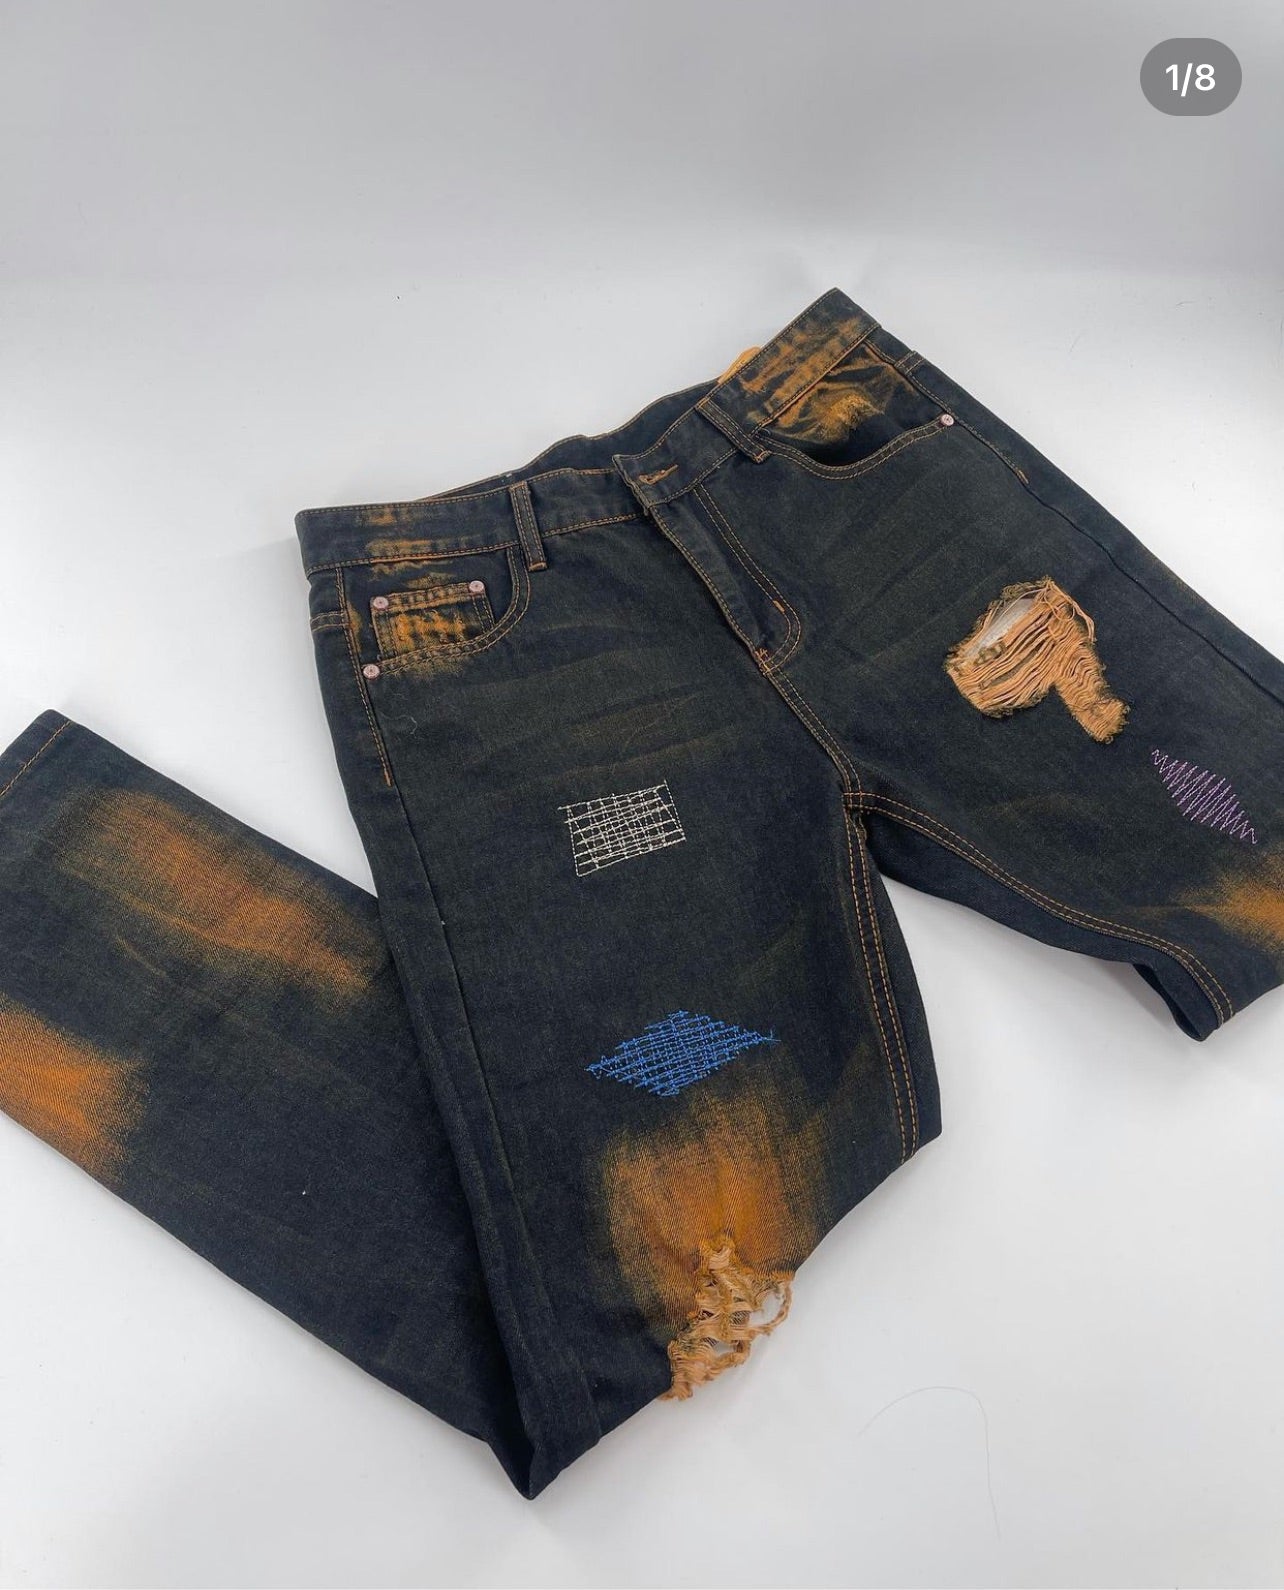 “Fashion Jeans” Embroidered Jeans (Sz 34)